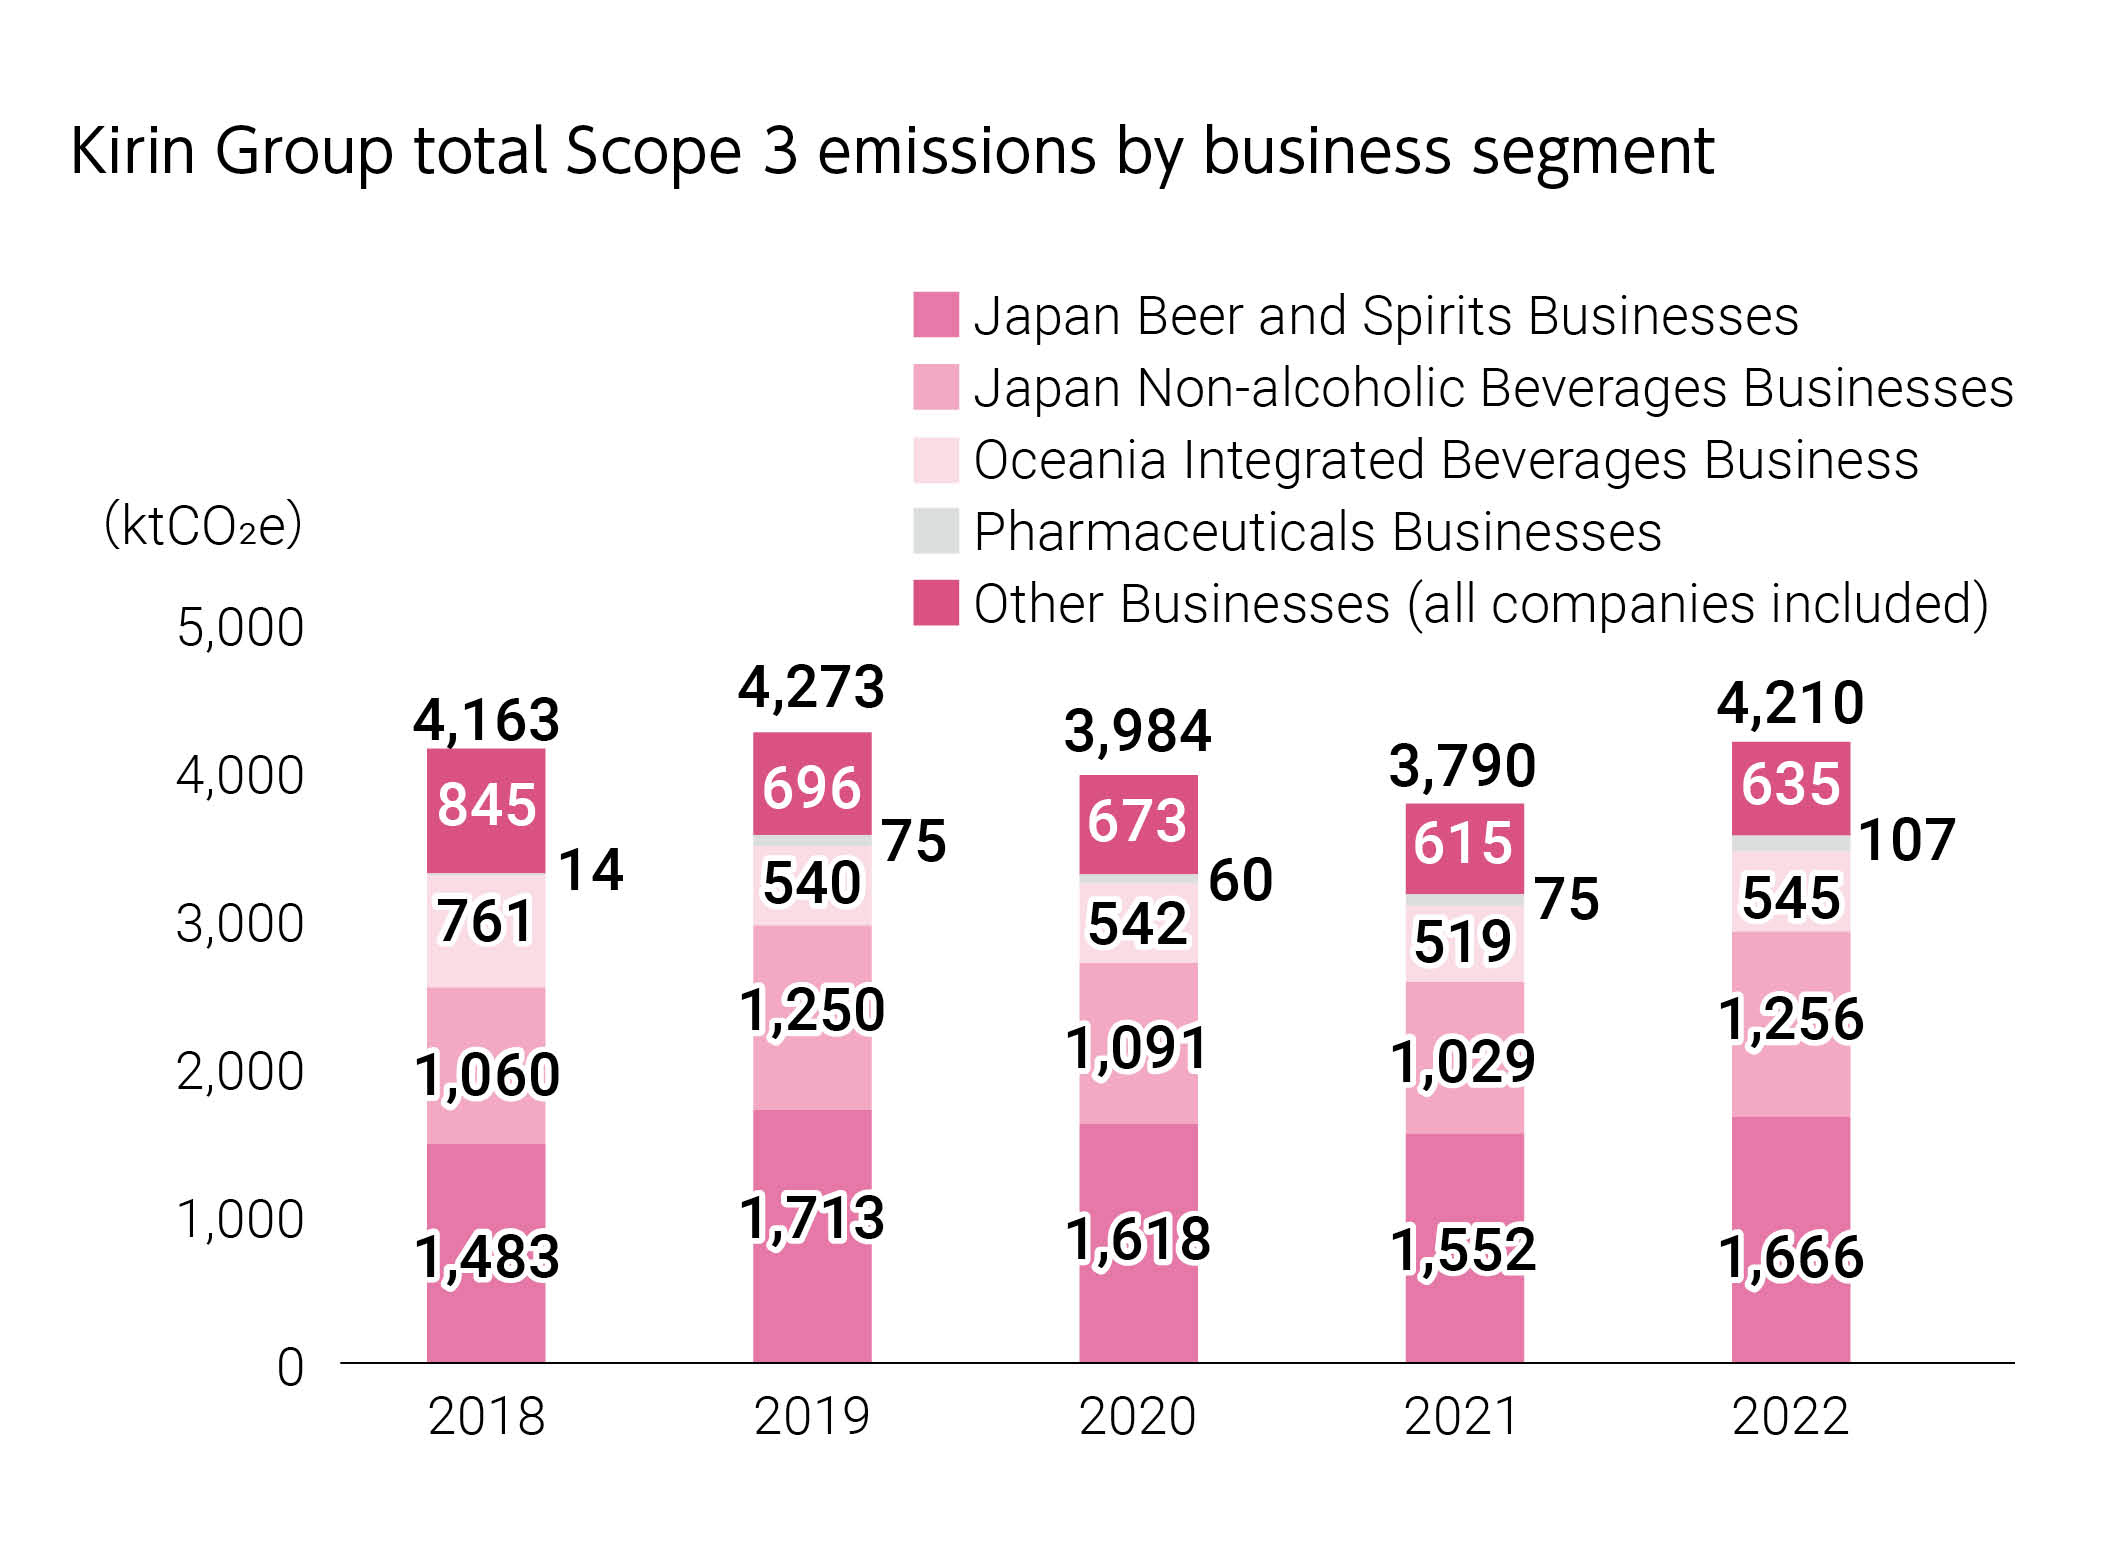 Kirin Group total Scope 3 emissions by business segment